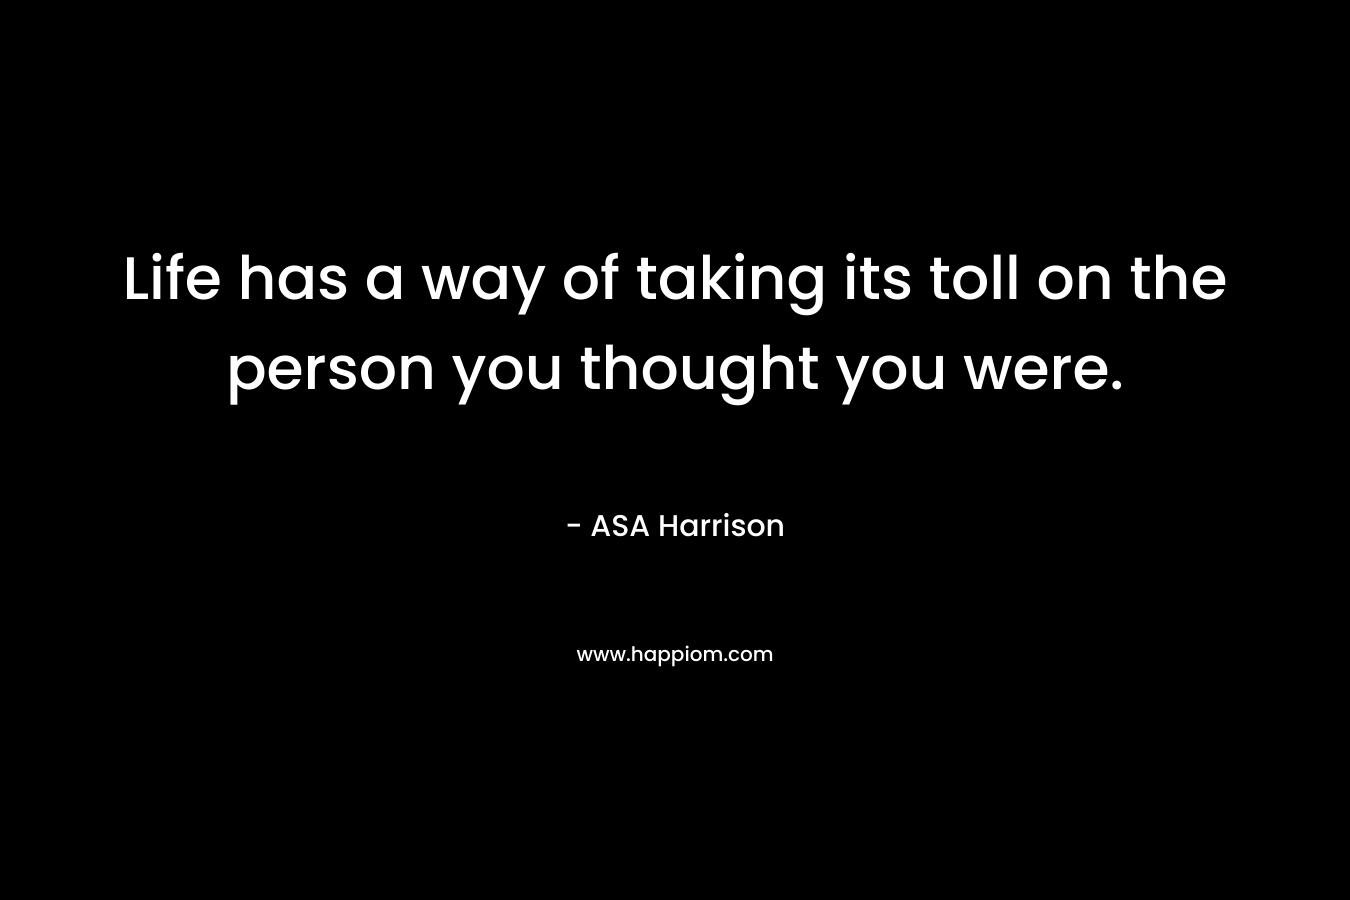 Life has a way of taking its toll on the person you thought you were.